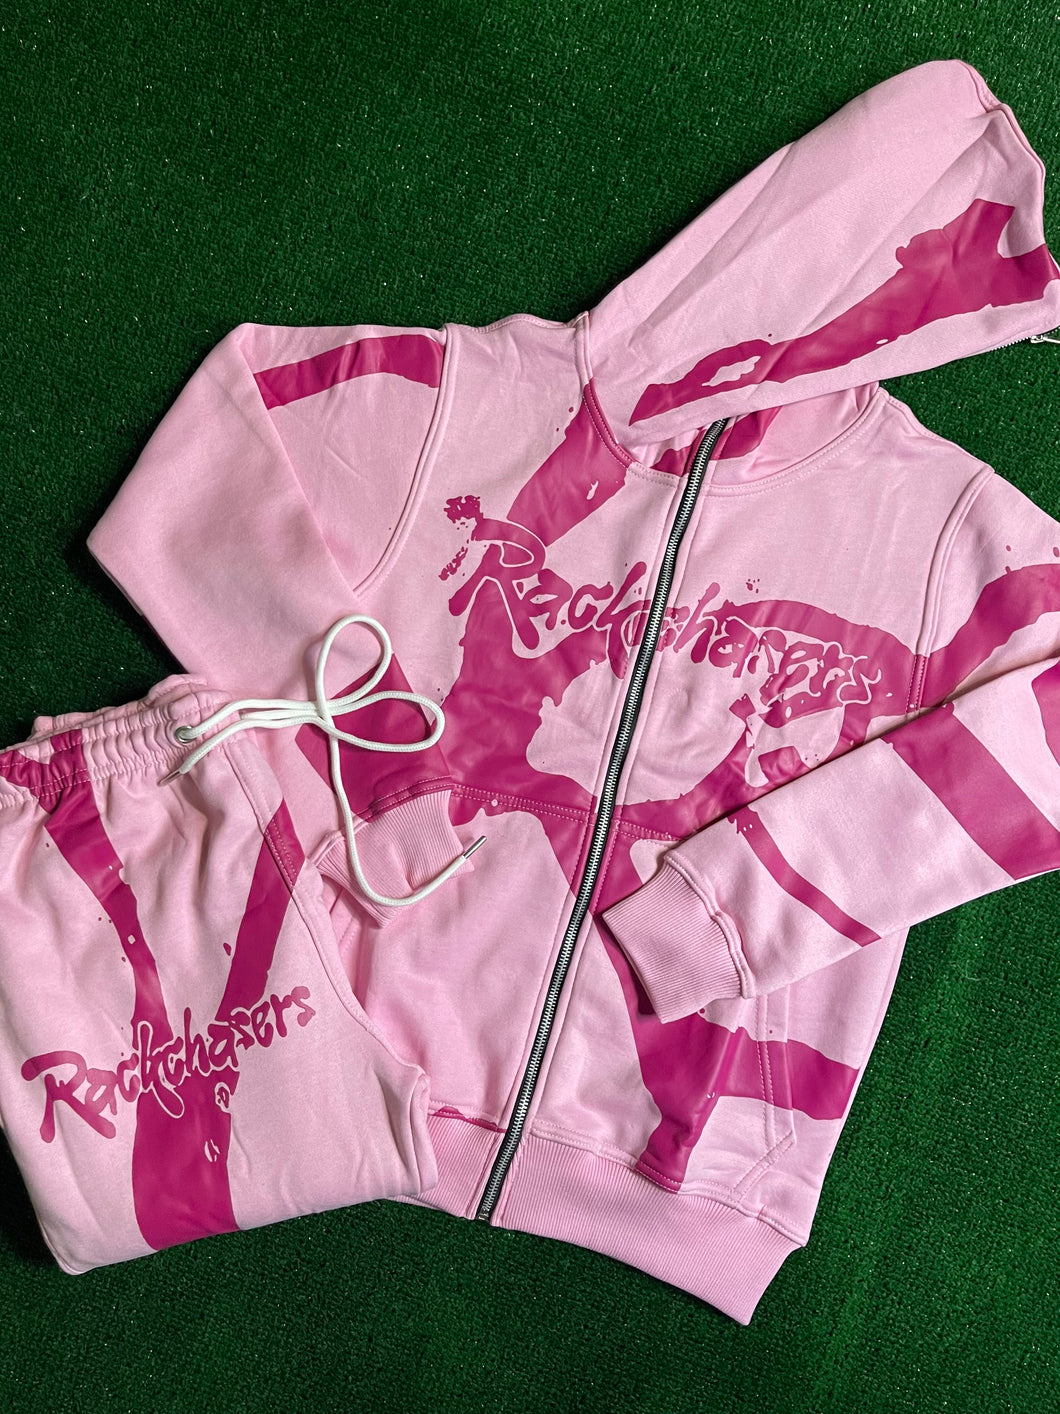 Rackchasers tracksuit pink